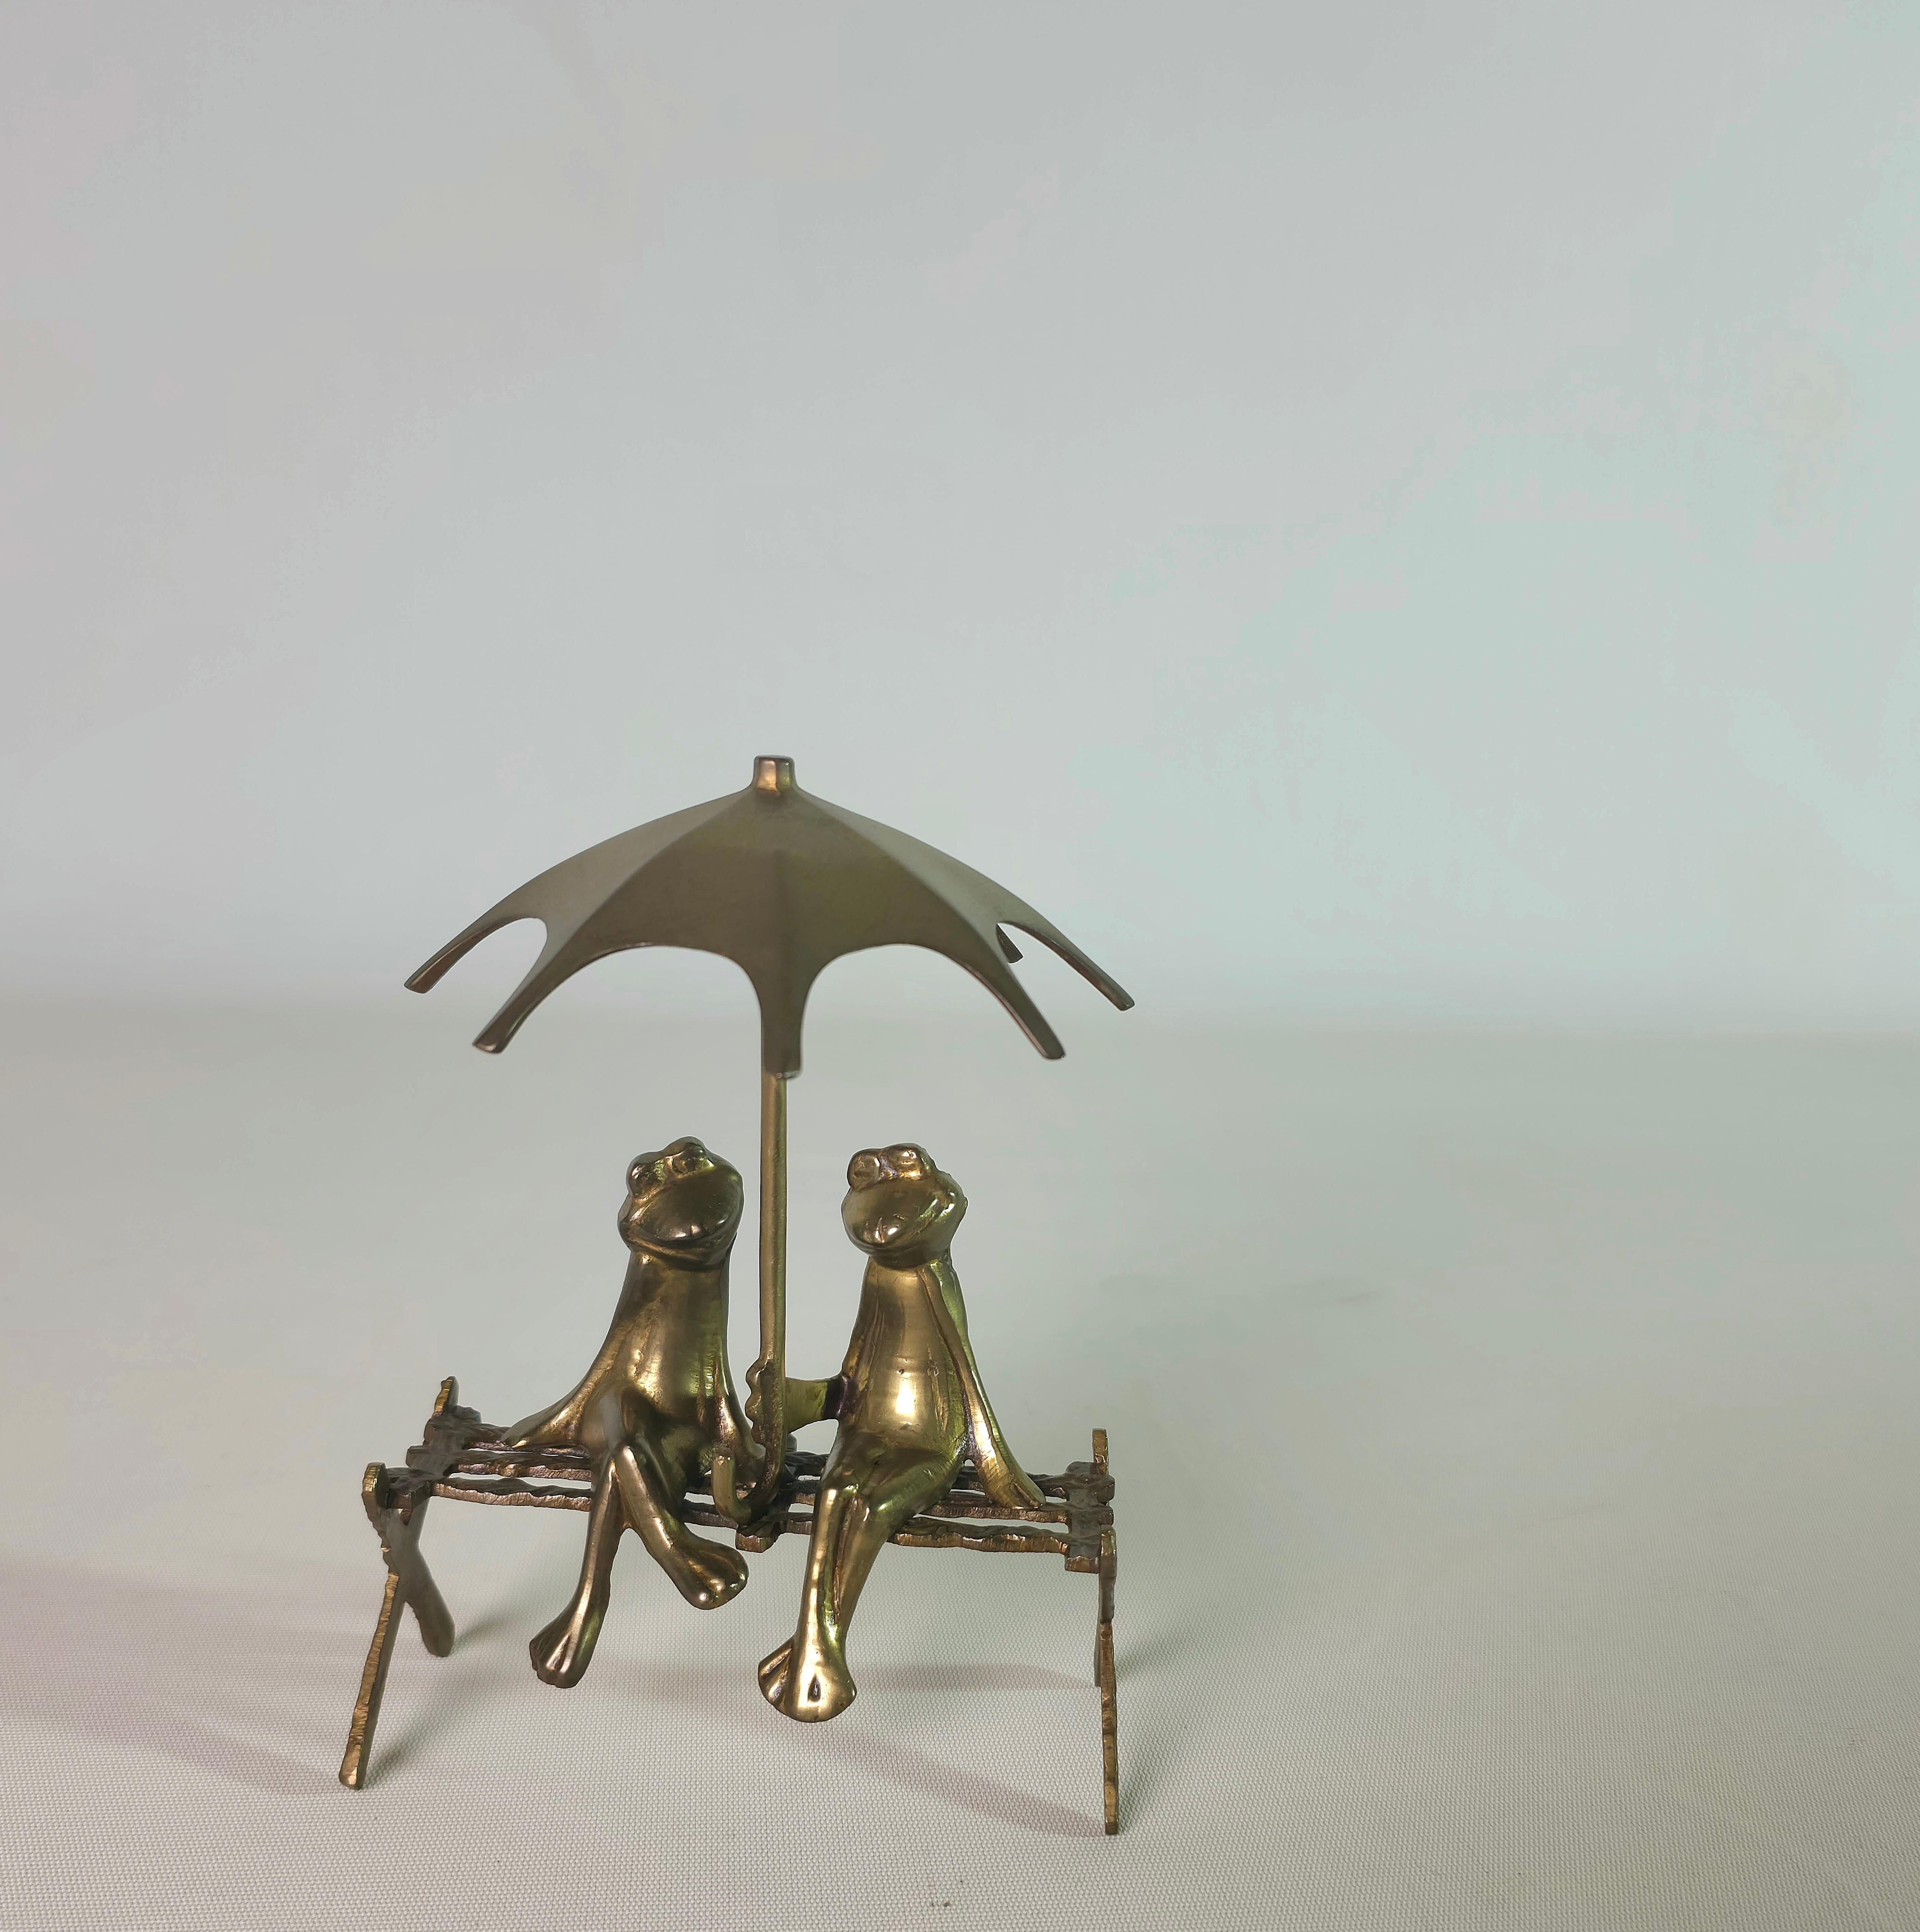 Nice decorative object entirely in brass depicting two frogs relaxing on a bench.

Note: We try to offer our customers an excellent service even in shipments all over the world, collaborating with one of the best shipping partners, DHL, with very